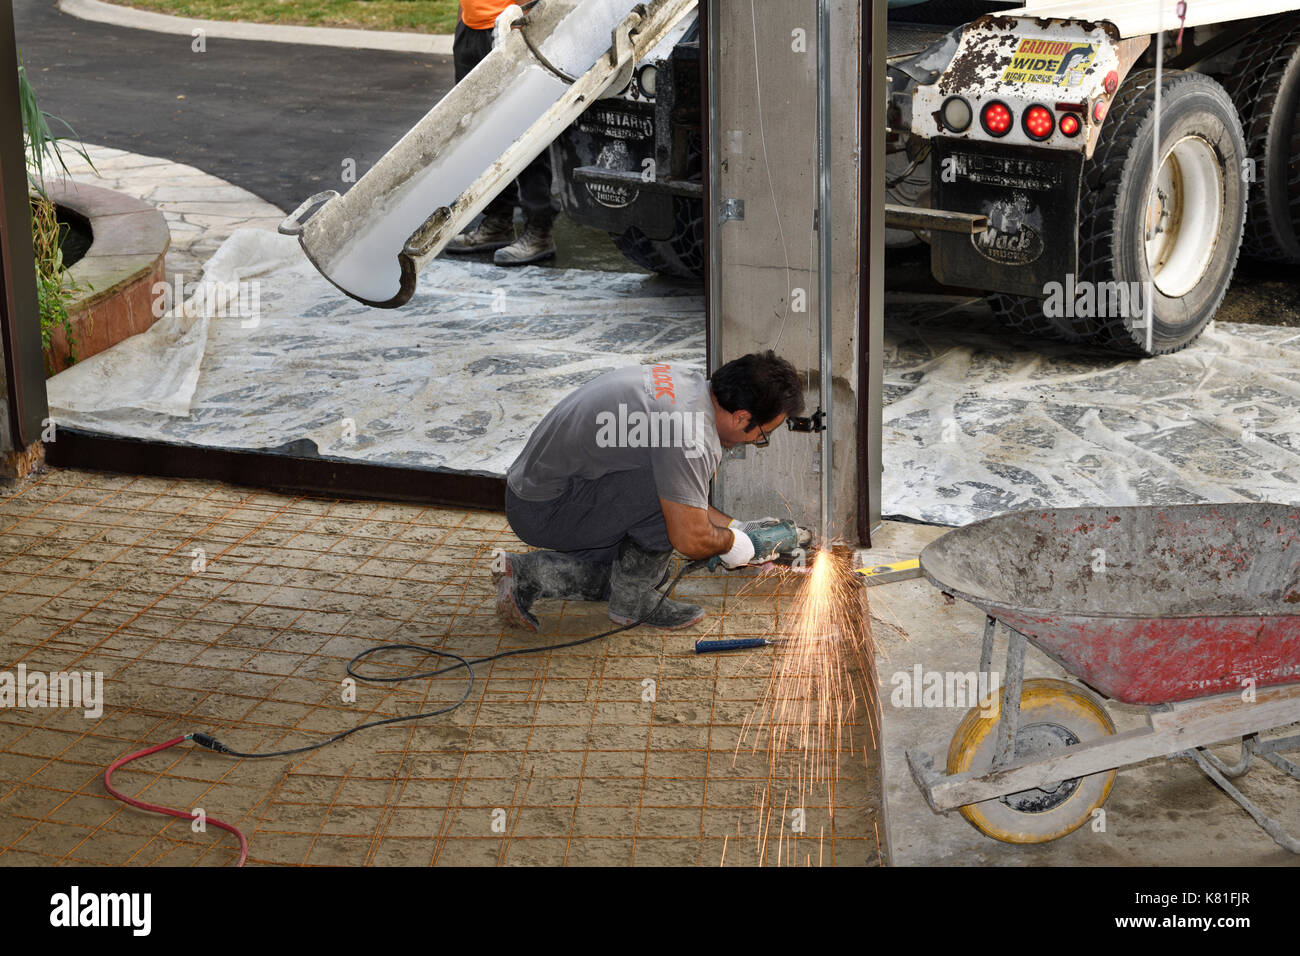 Worker grinding down steel garage door rails with sparks before pouring new concrete floor in residential garage Stock Photo